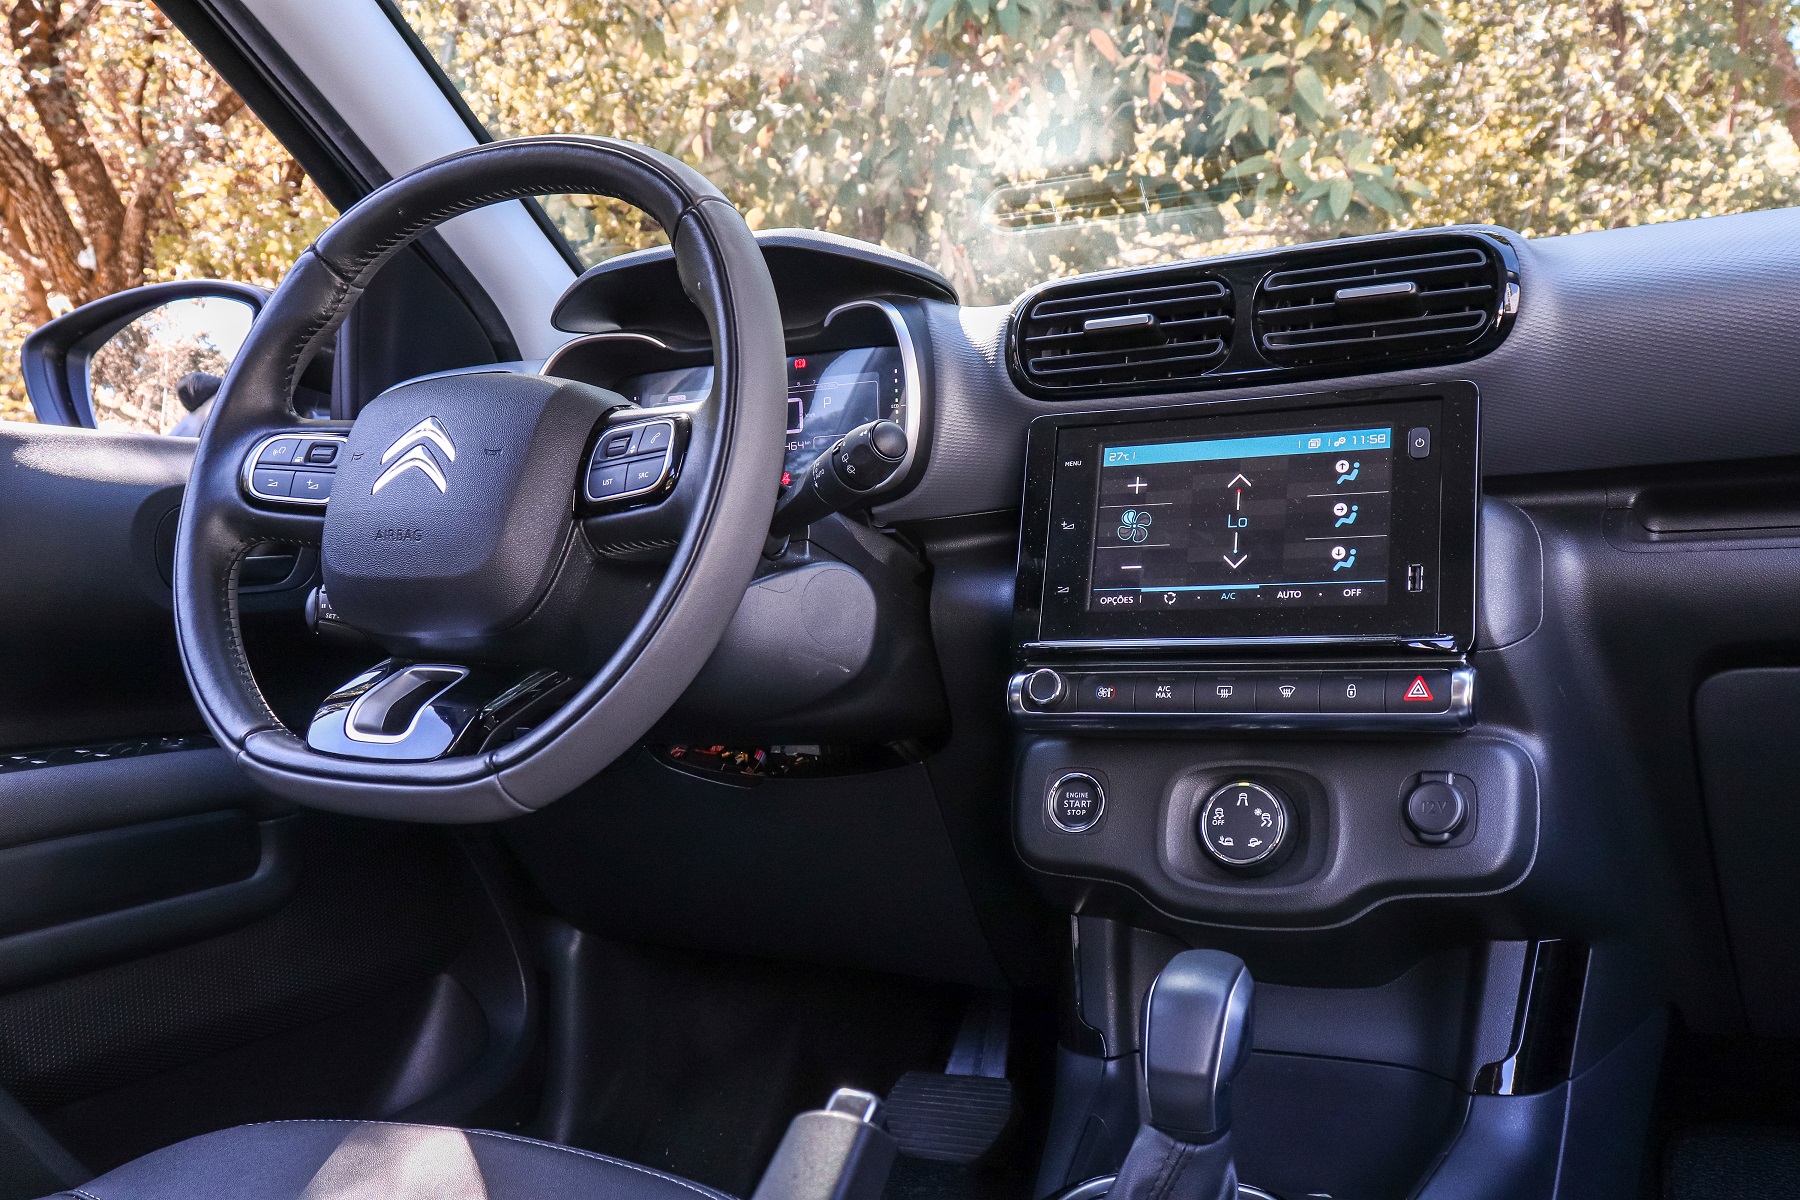 Citroen C4 Cactus Shine Pack THP 2022 in the center of the 7-inch multimedia screen